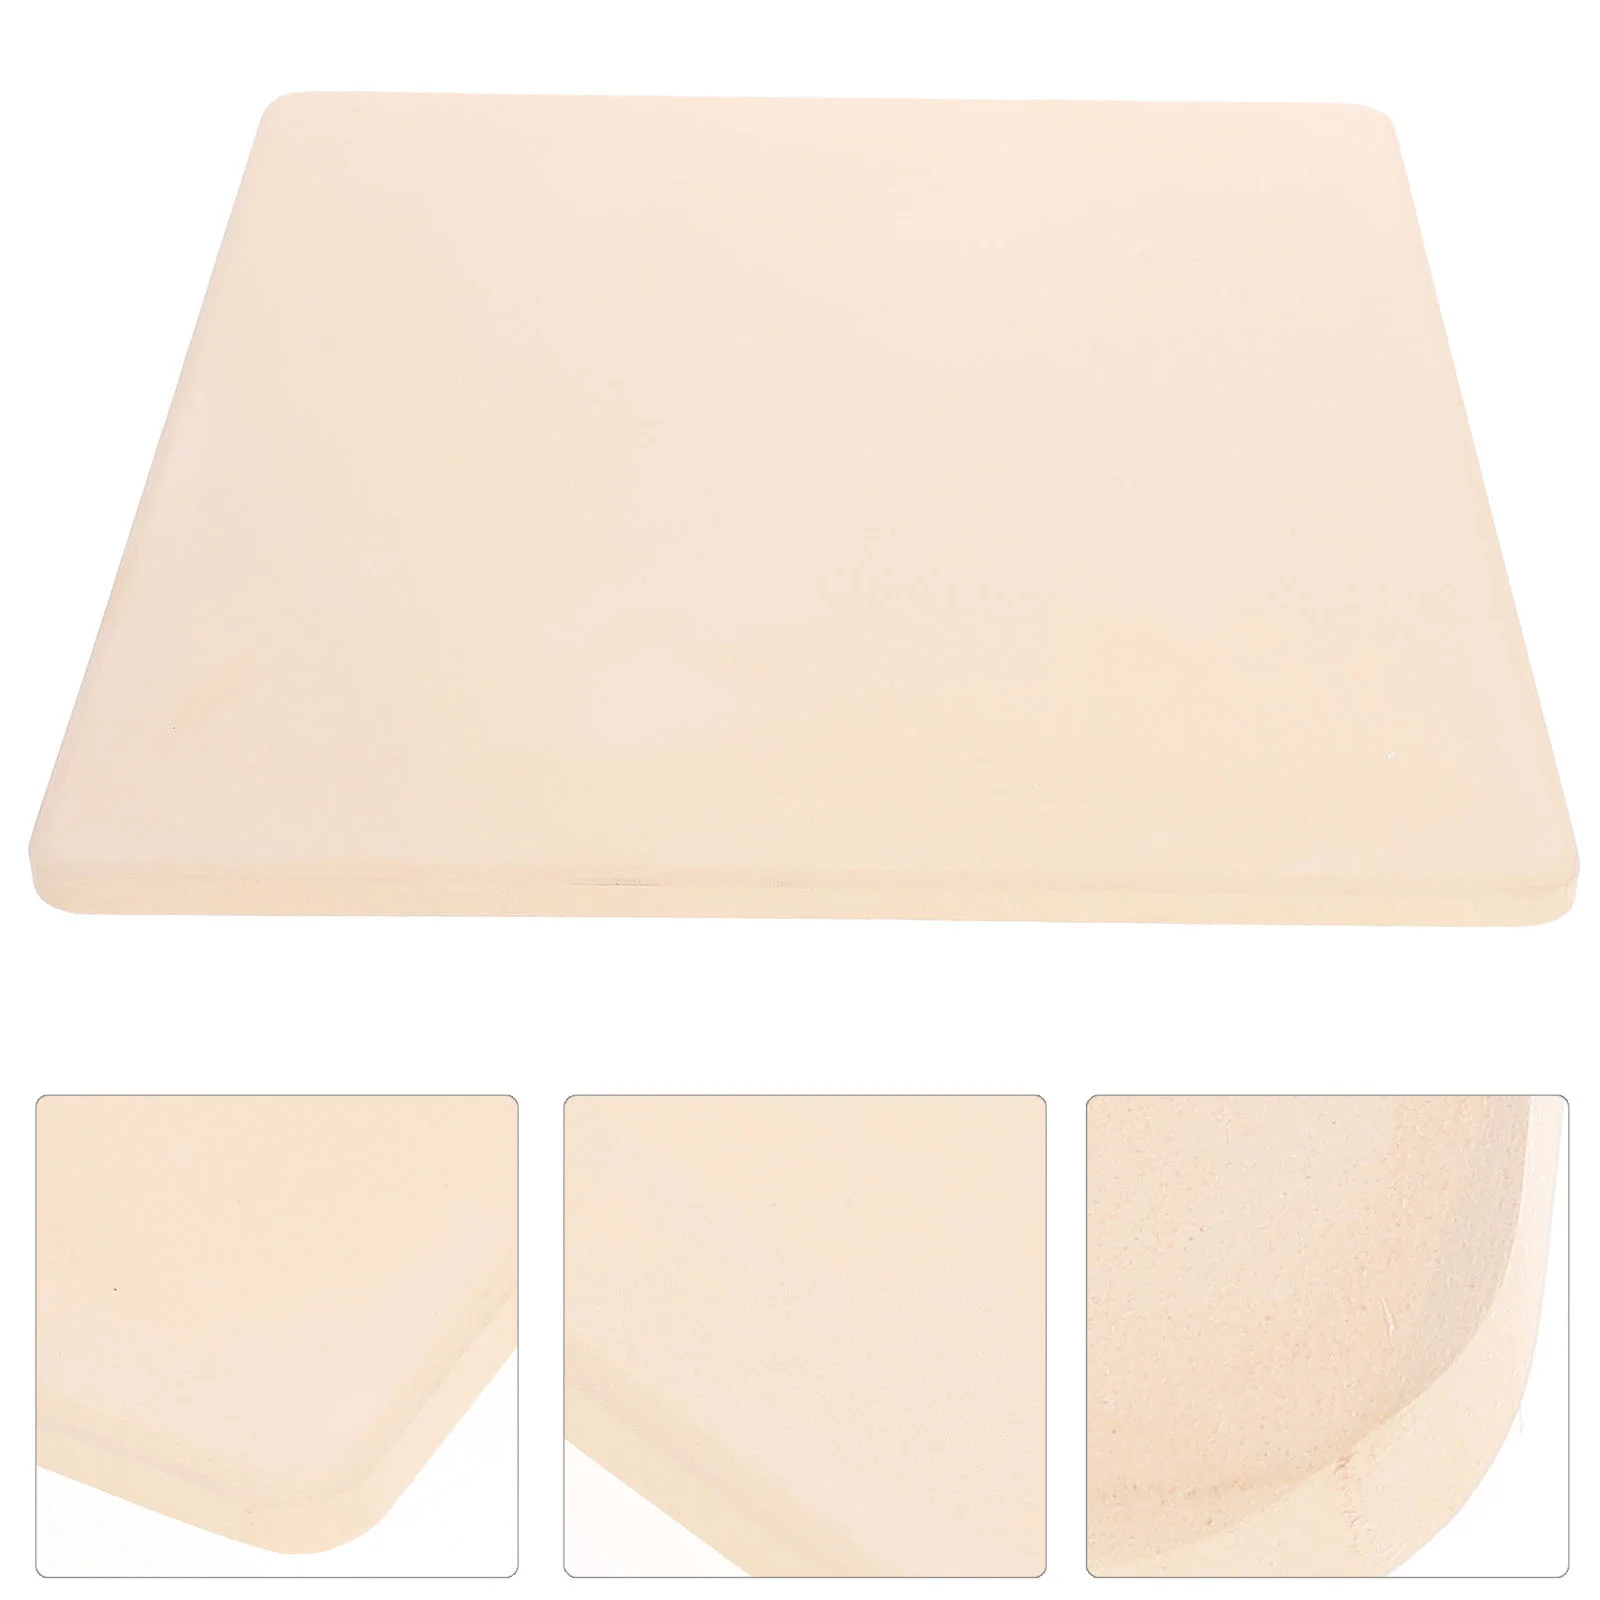 

Pizza Pan Oven Stone Bread Pizza Bake Stone Kitchen Cooking Pan Cordierite Bake Stone For Grill Baking 280X260X8mm